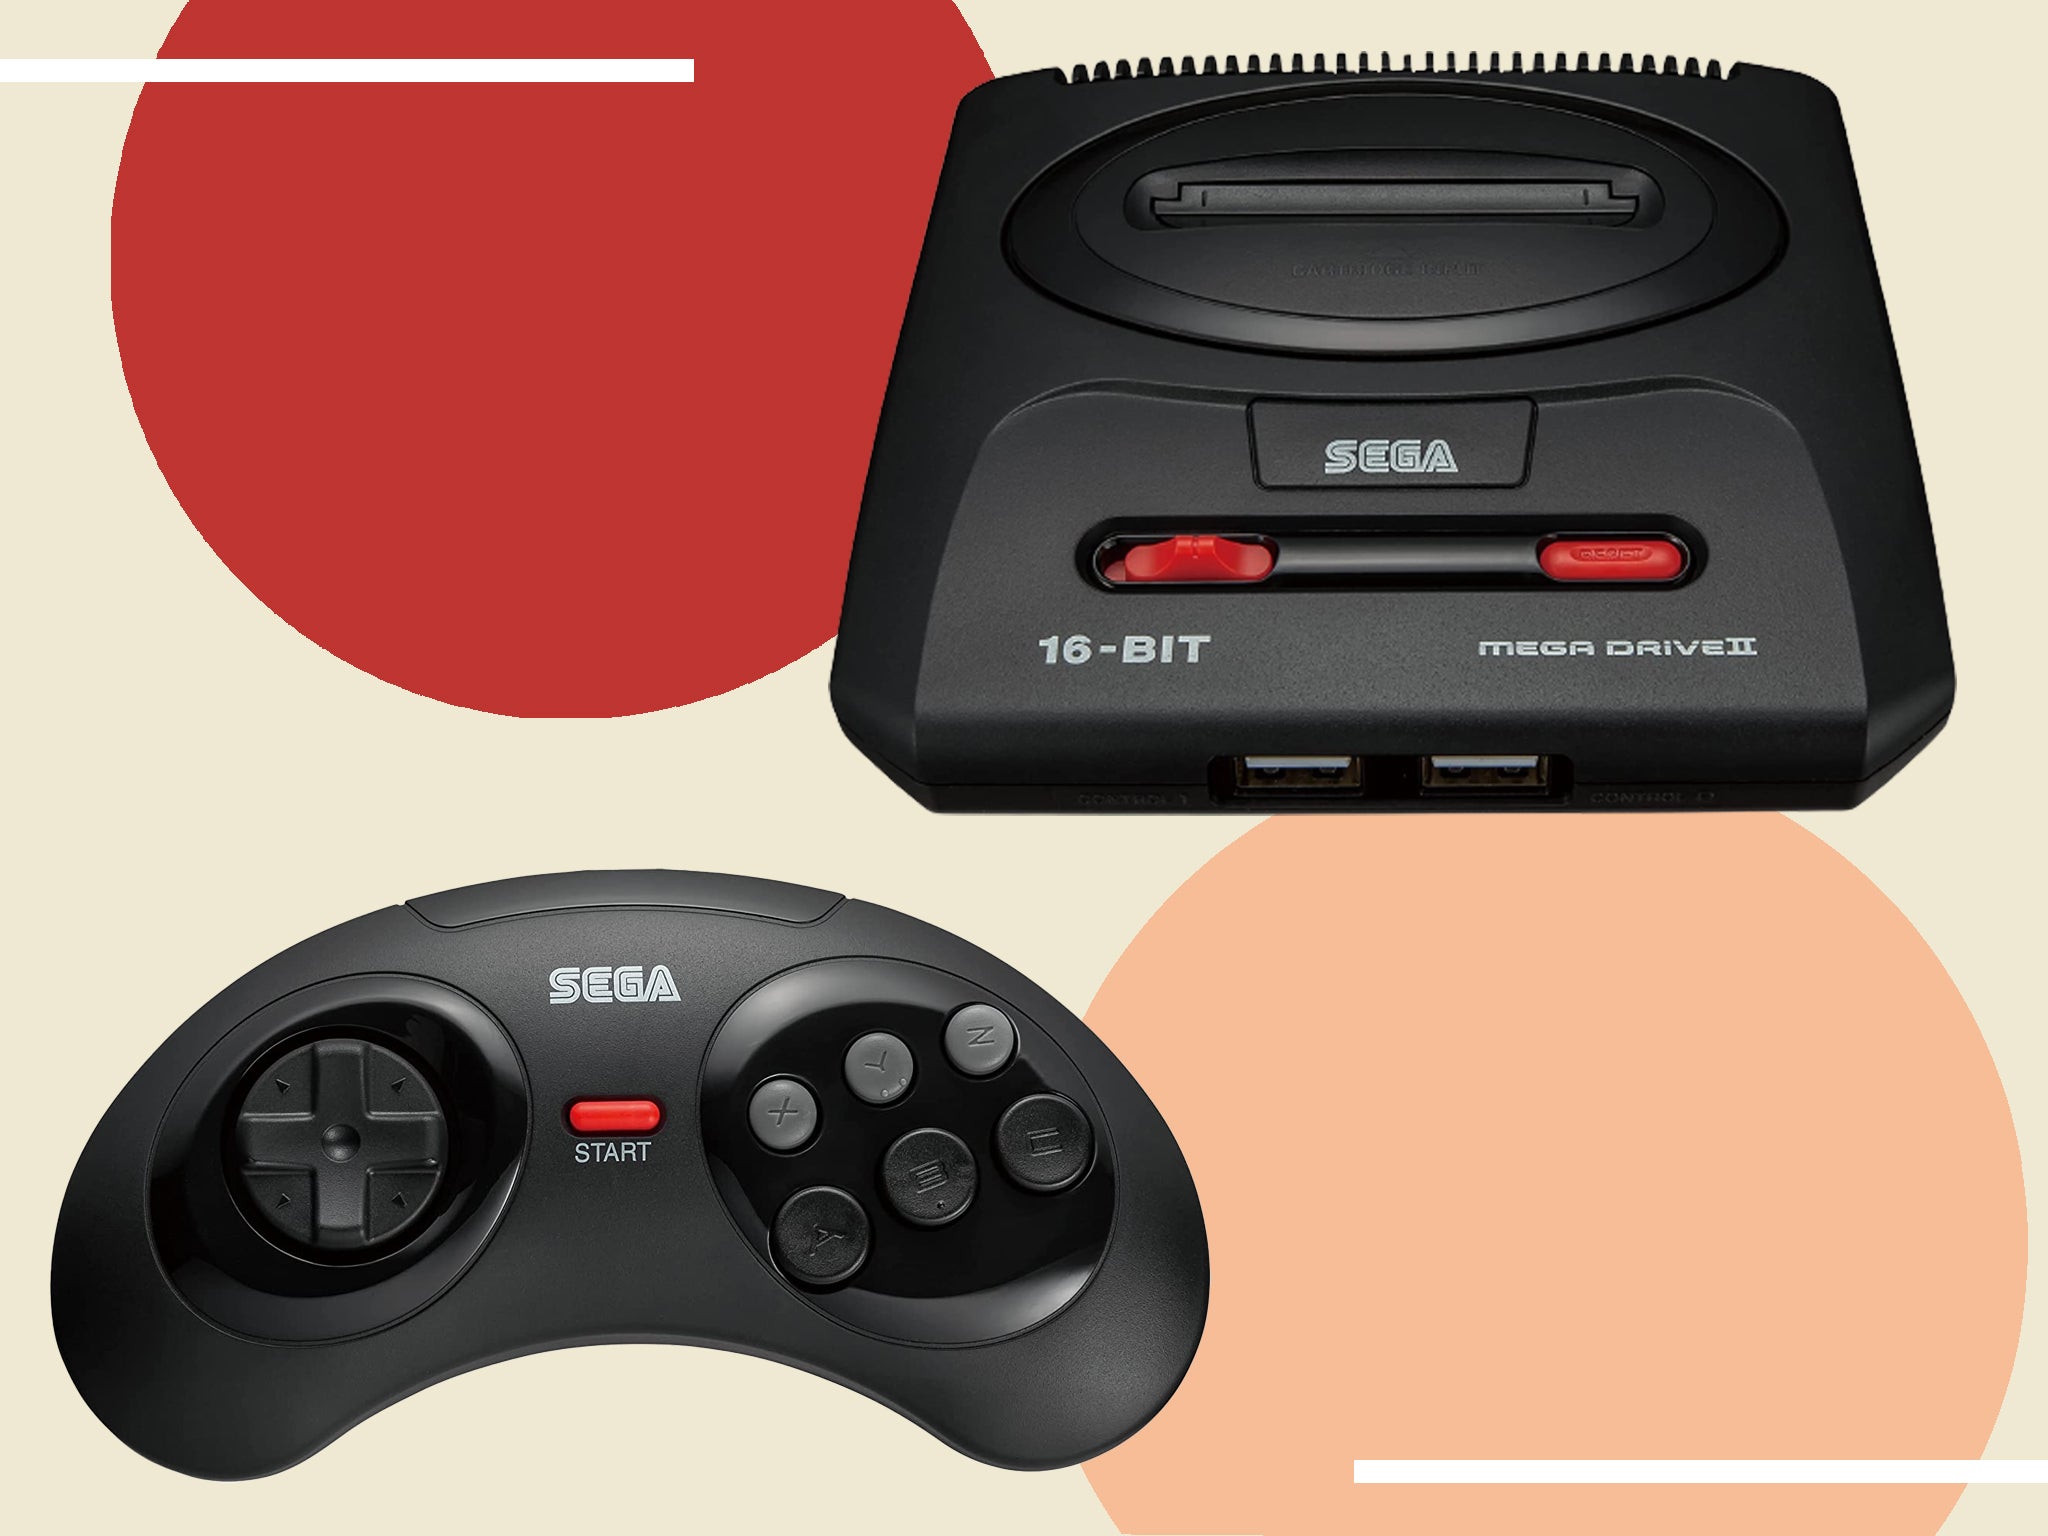 The console is said to be 55 per cent smaller than the original Mega Drive